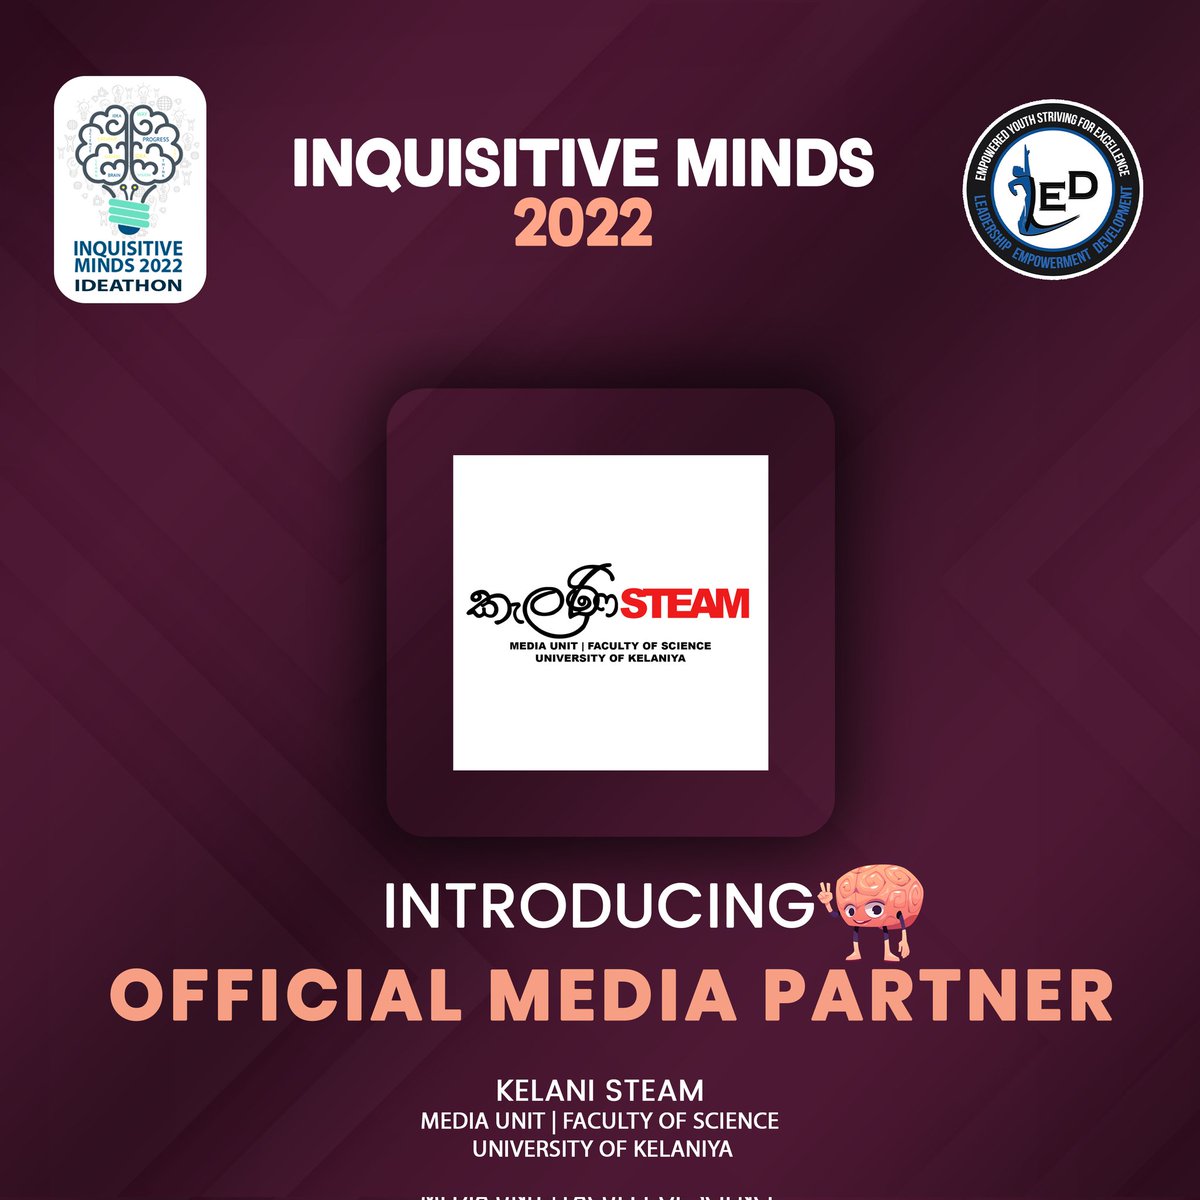 It is with great pride that we announce කැලණි STEAM as the Official Media Partner of Inquisitive Minds 2022 - Ideathon organized by LED KLN.

We are grateful for the opportunity to join hands with such a talented team for the success of our event.

#InquisitiveMinds_LEDKLN